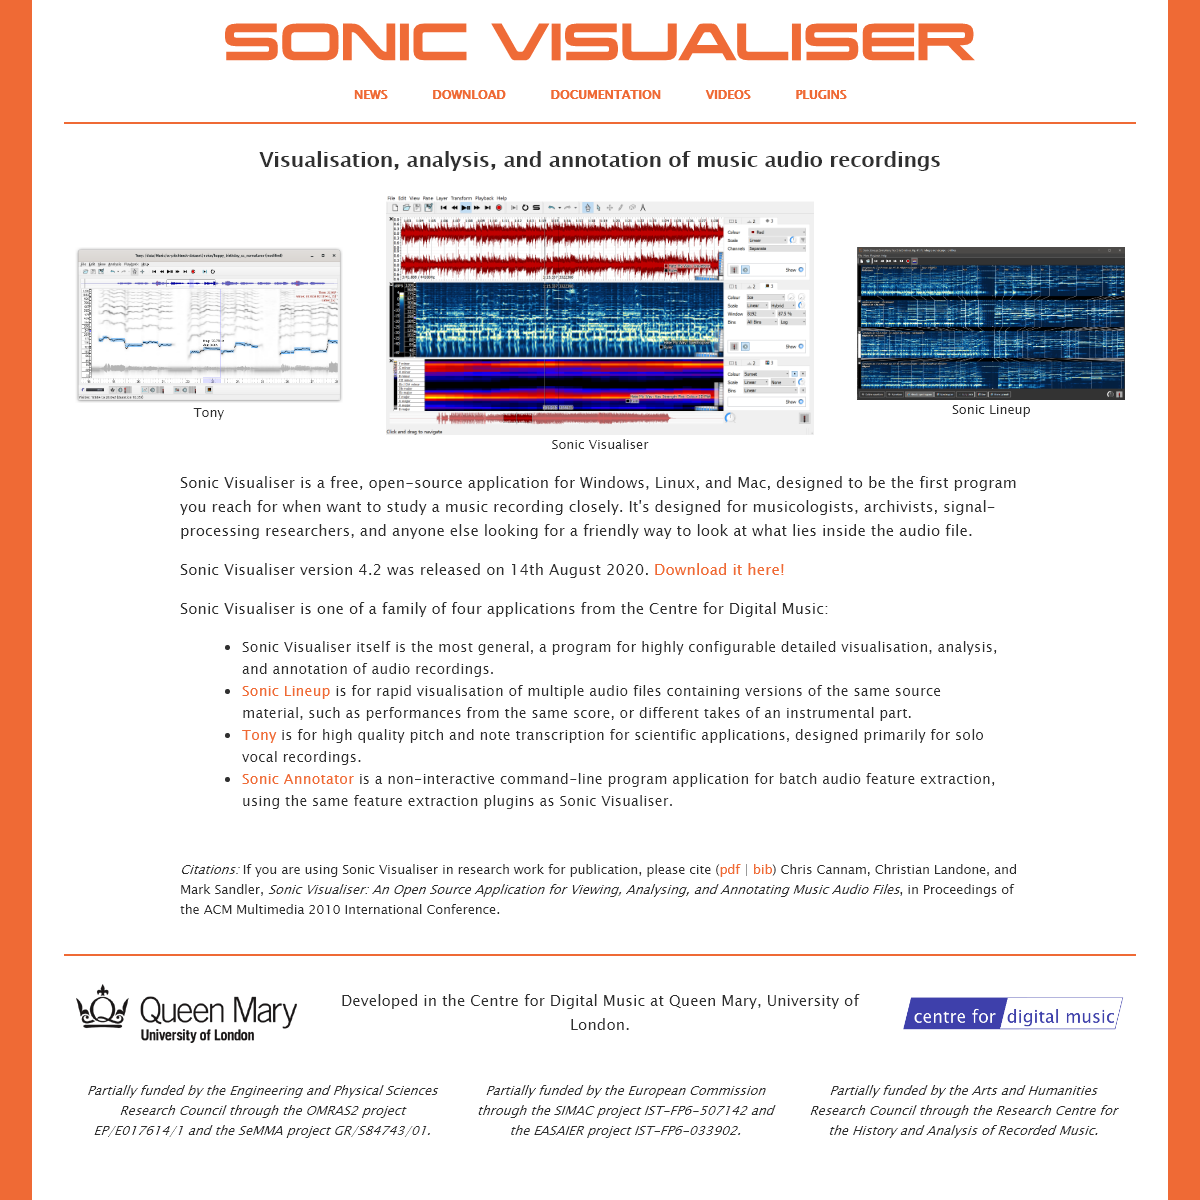 A complete backup of sonicvisualiser.org